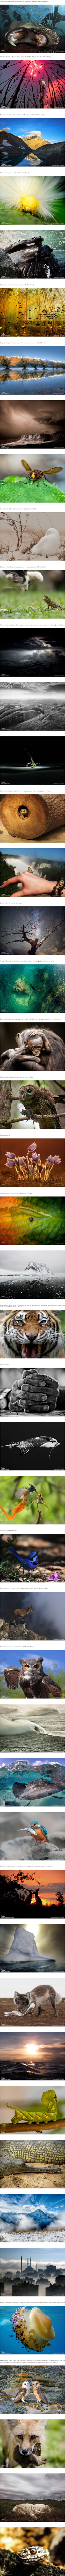 &quot;National Geographic&quot; -     http://fishki.net/comment.php?id=127704#/